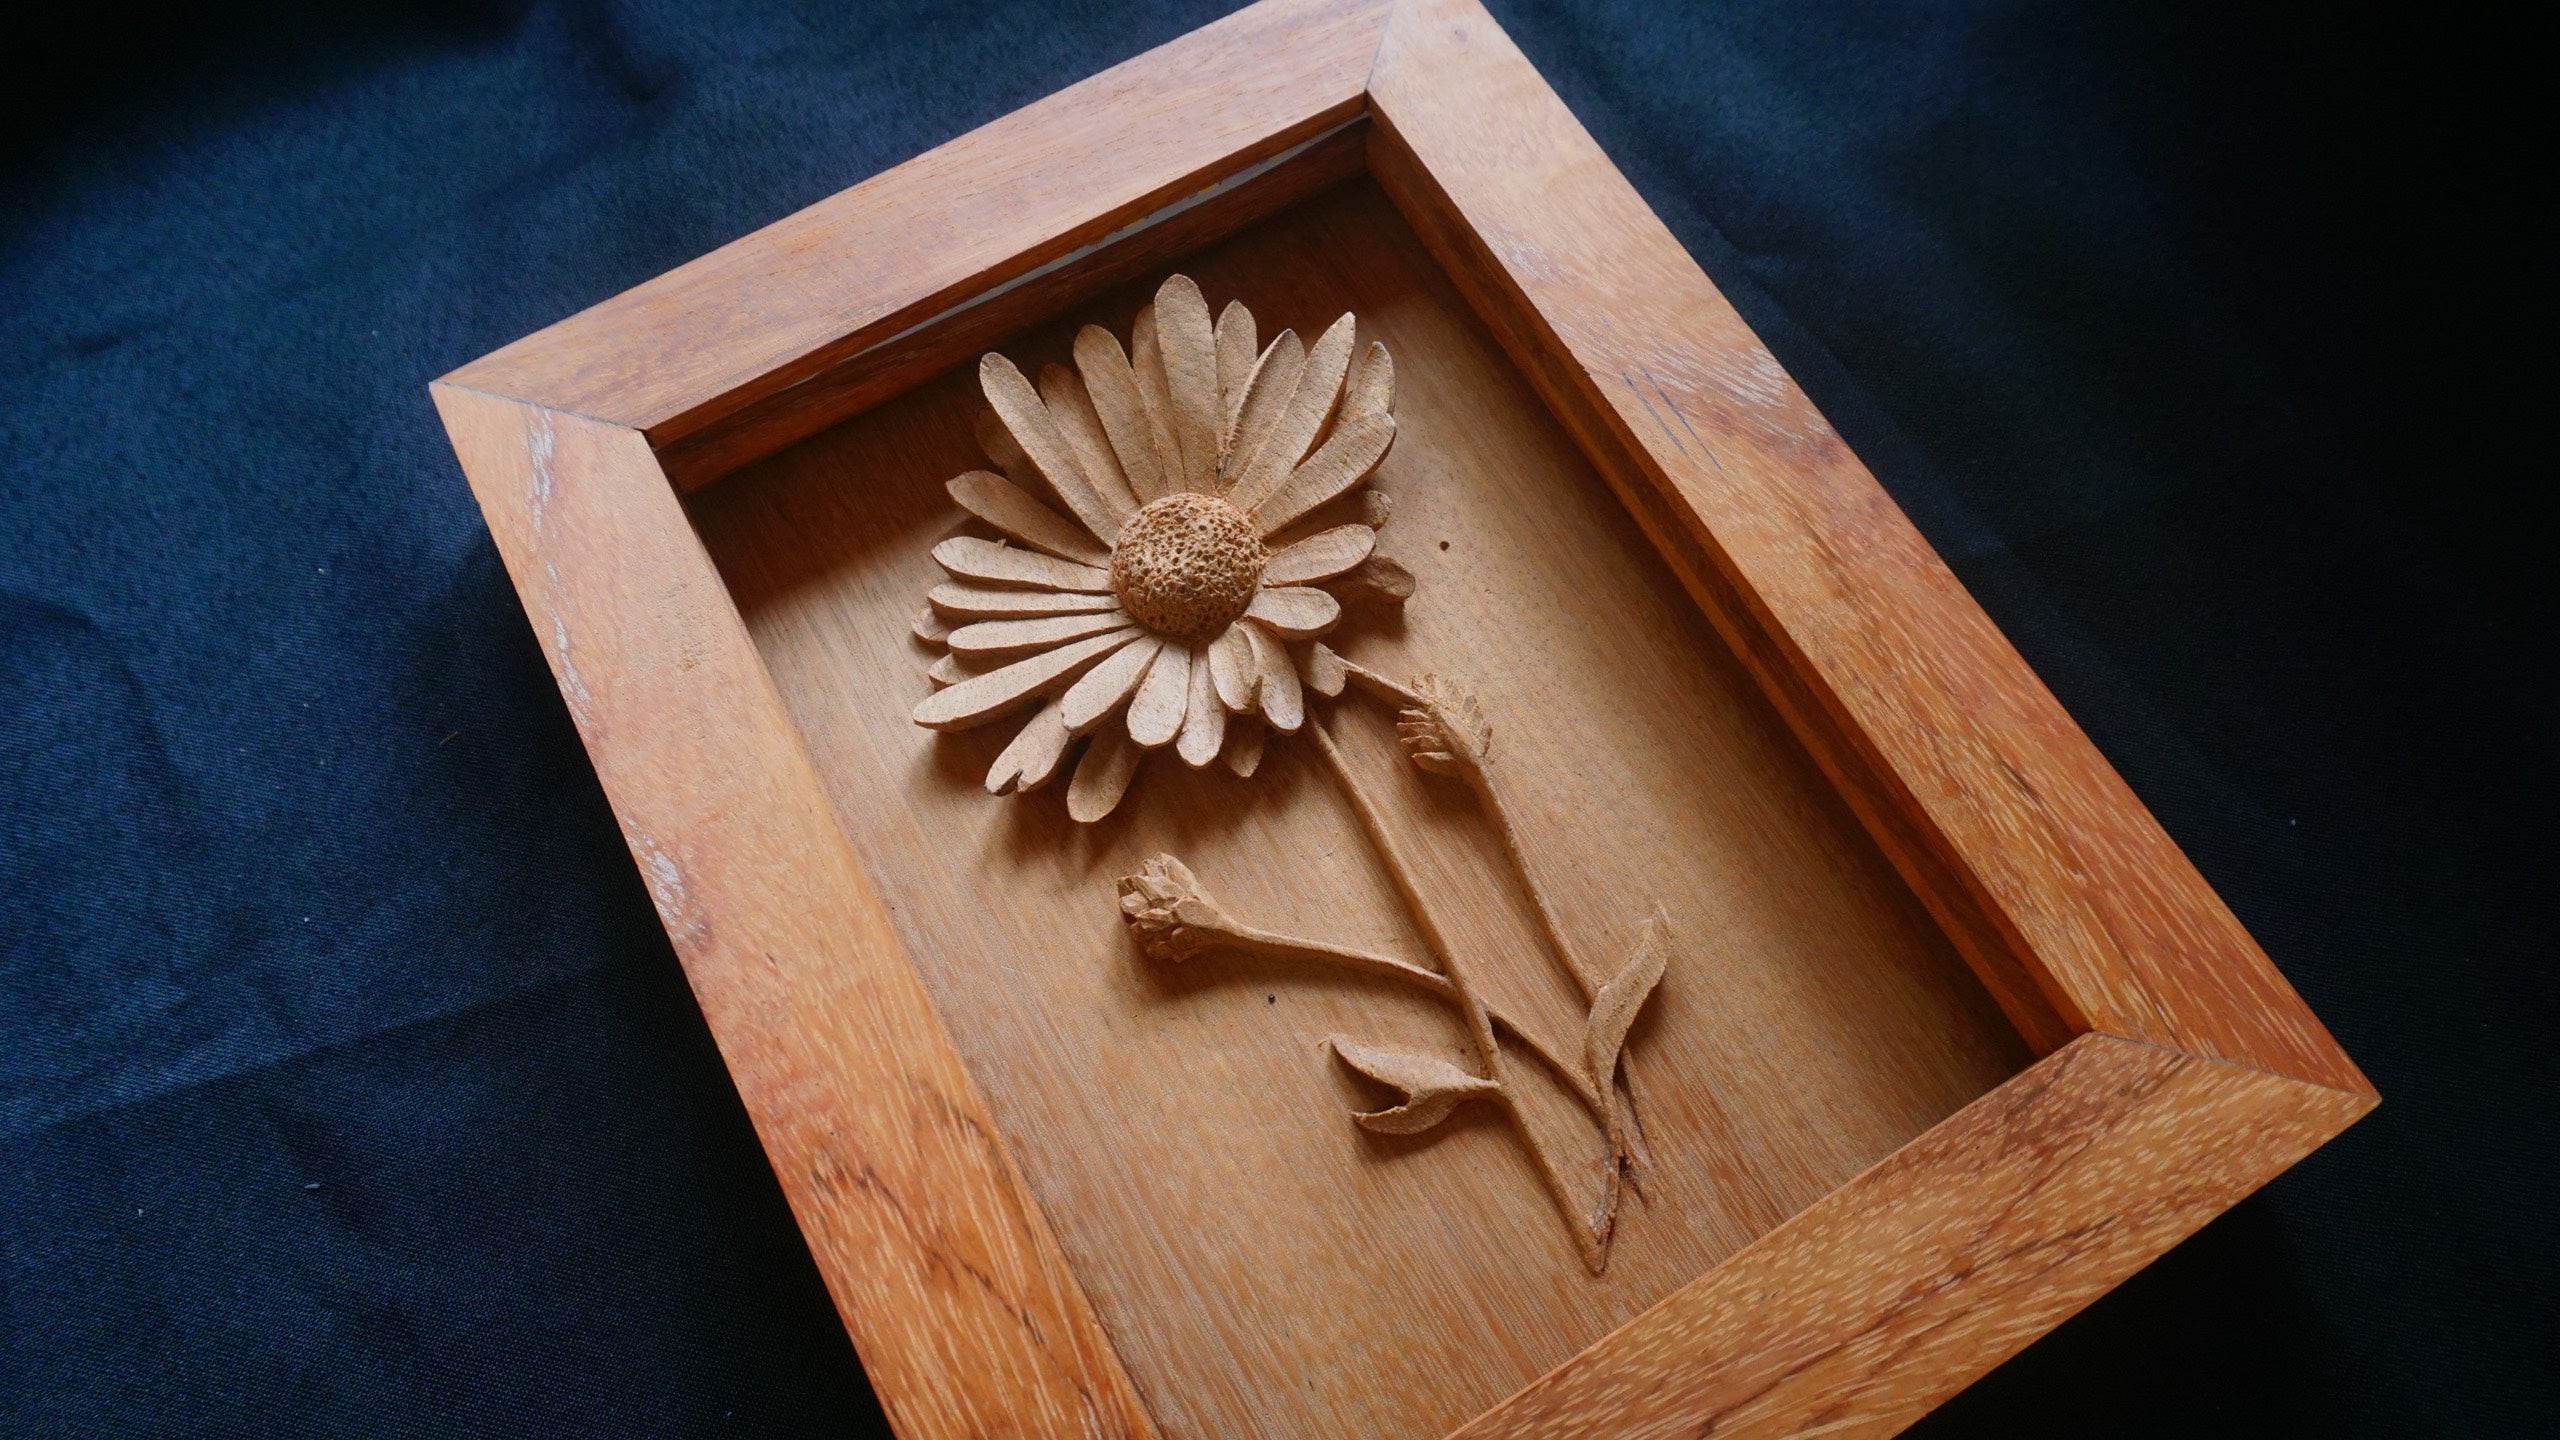 Wood Carving A Simple Flower